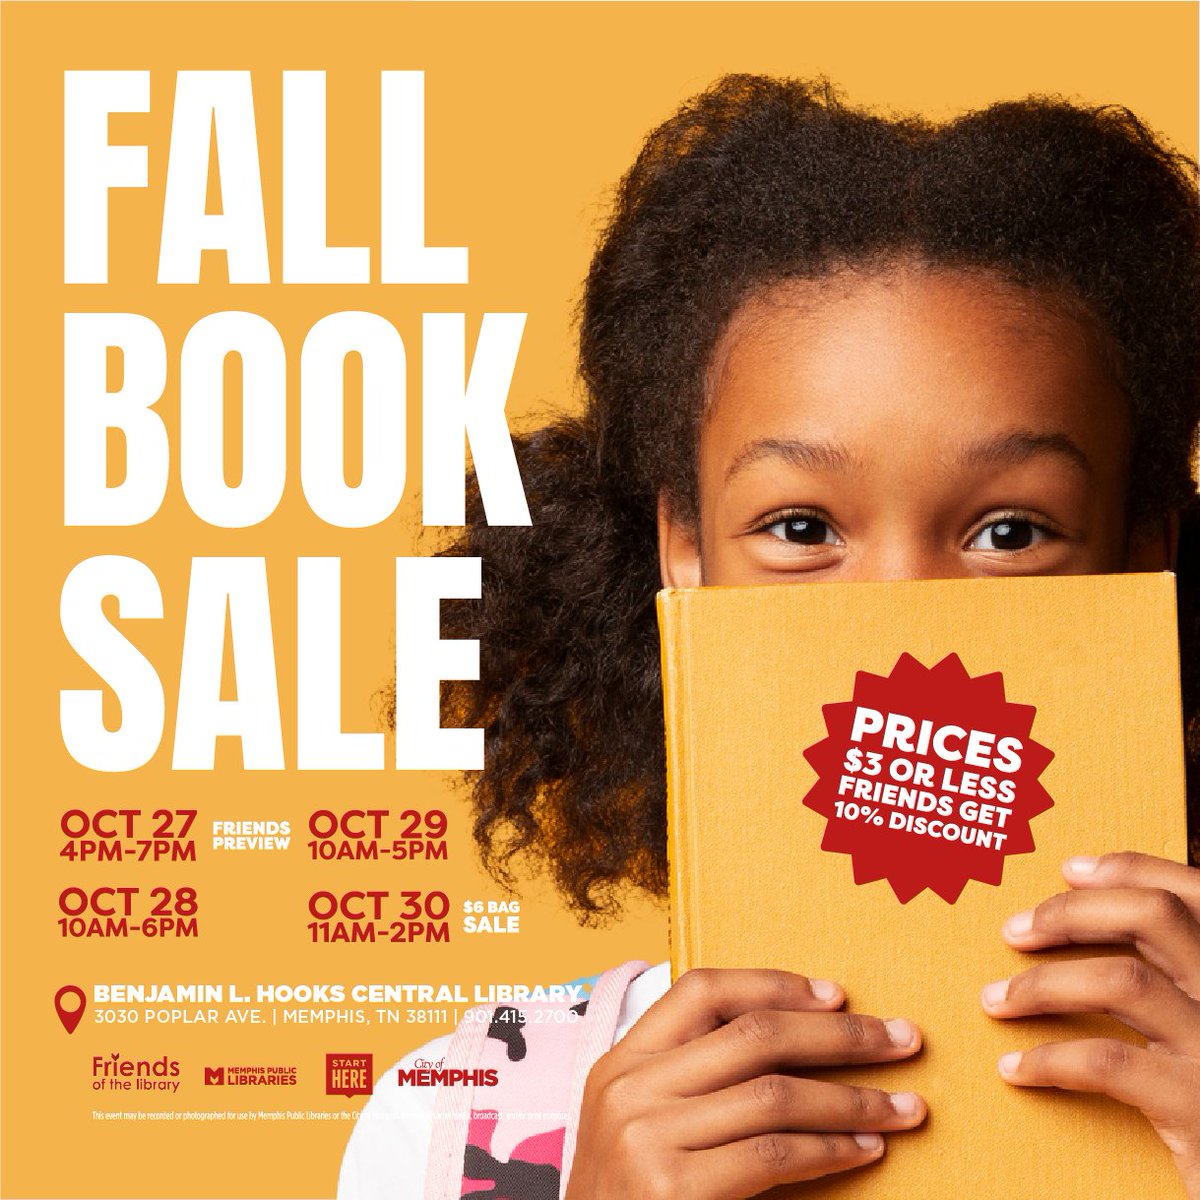 We are just over a week away from the Fall Book Sale! Be there!